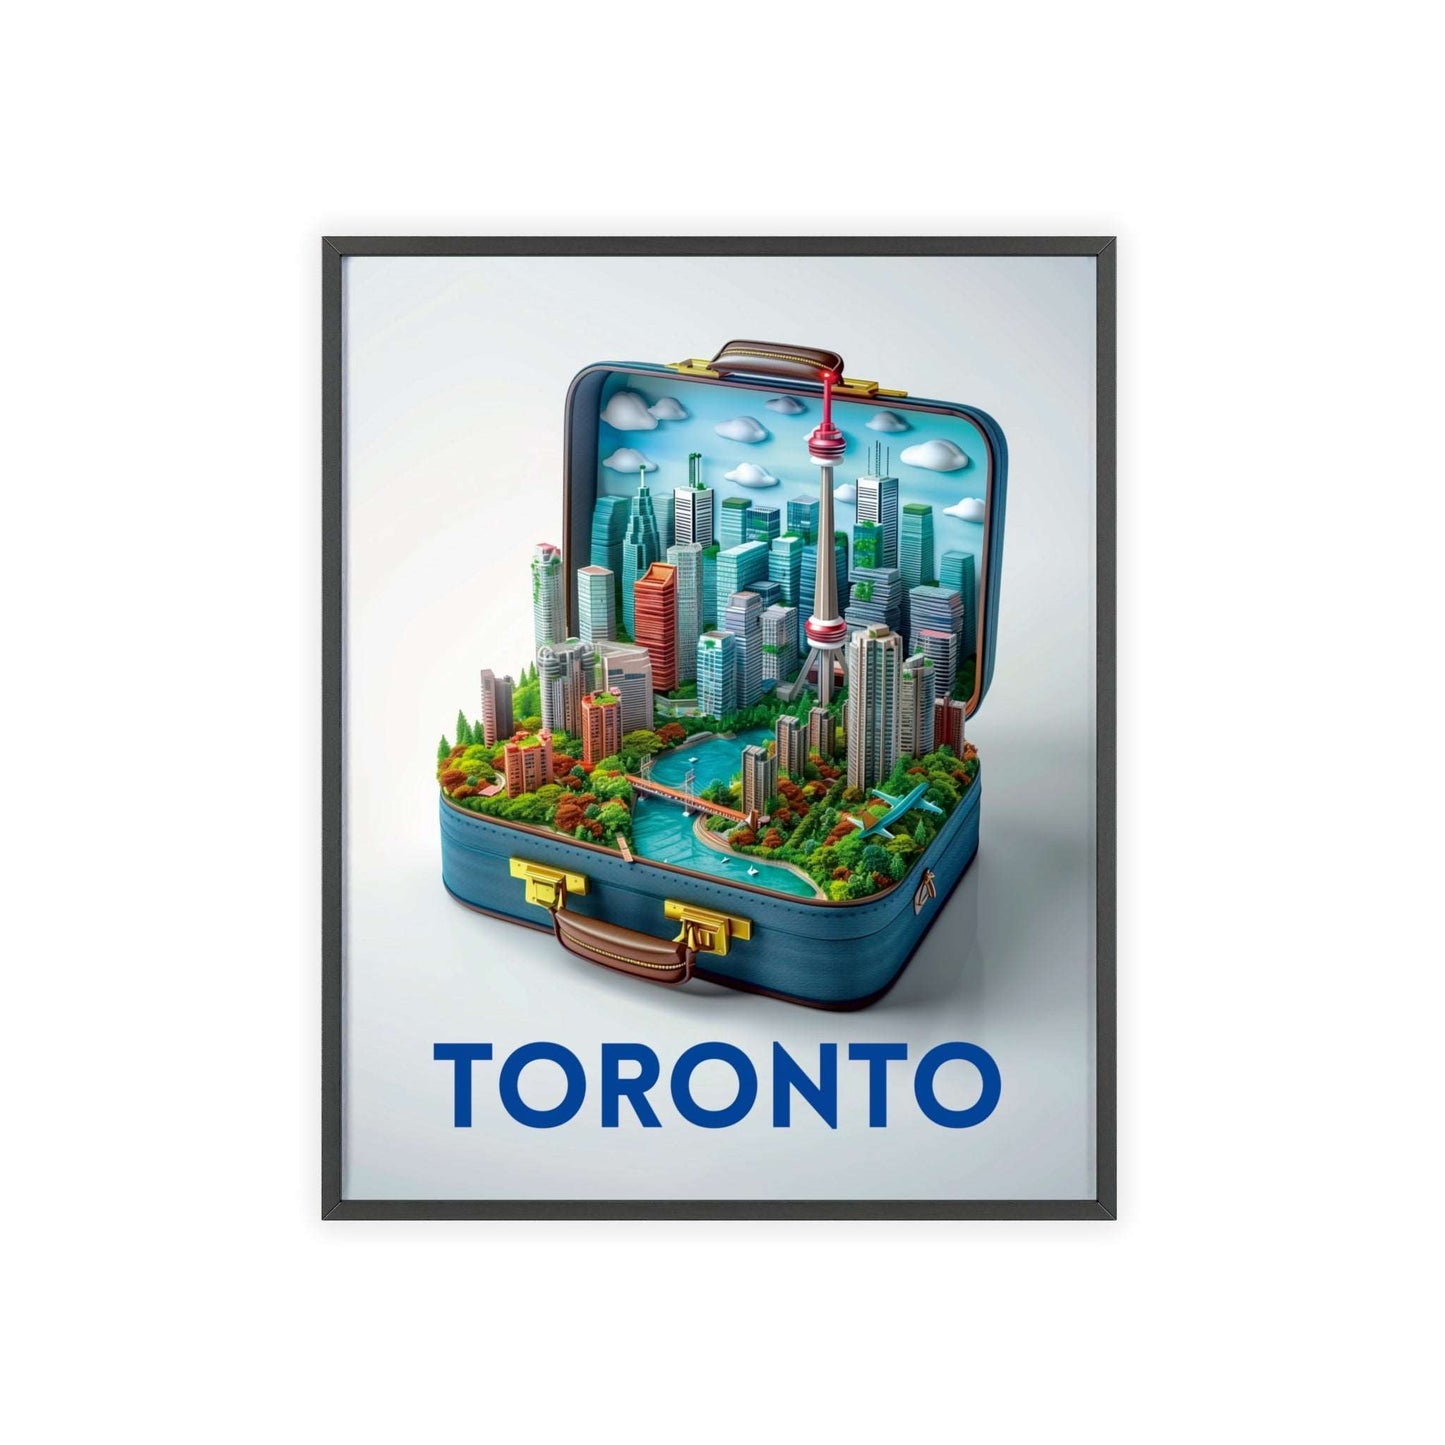 Travel poster titled "Toronto in a Suitcase" featuring a stylized illustration capturing the essence of Toronto. The poster is designed for modern home decor.